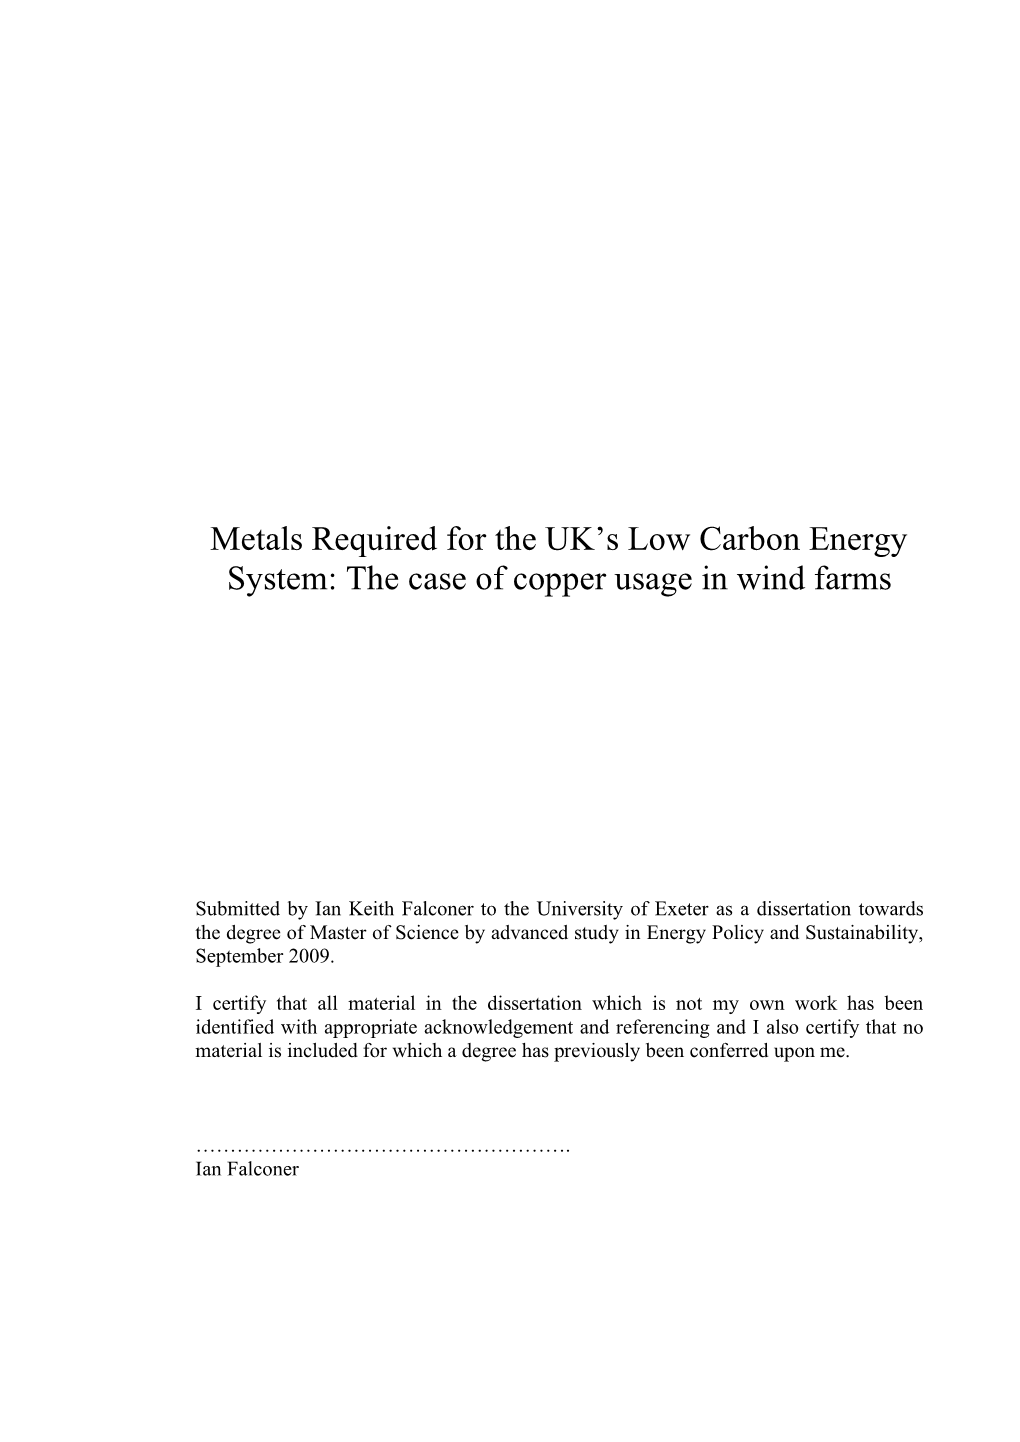 Metals Required for the UK's Low Carbon Energy System